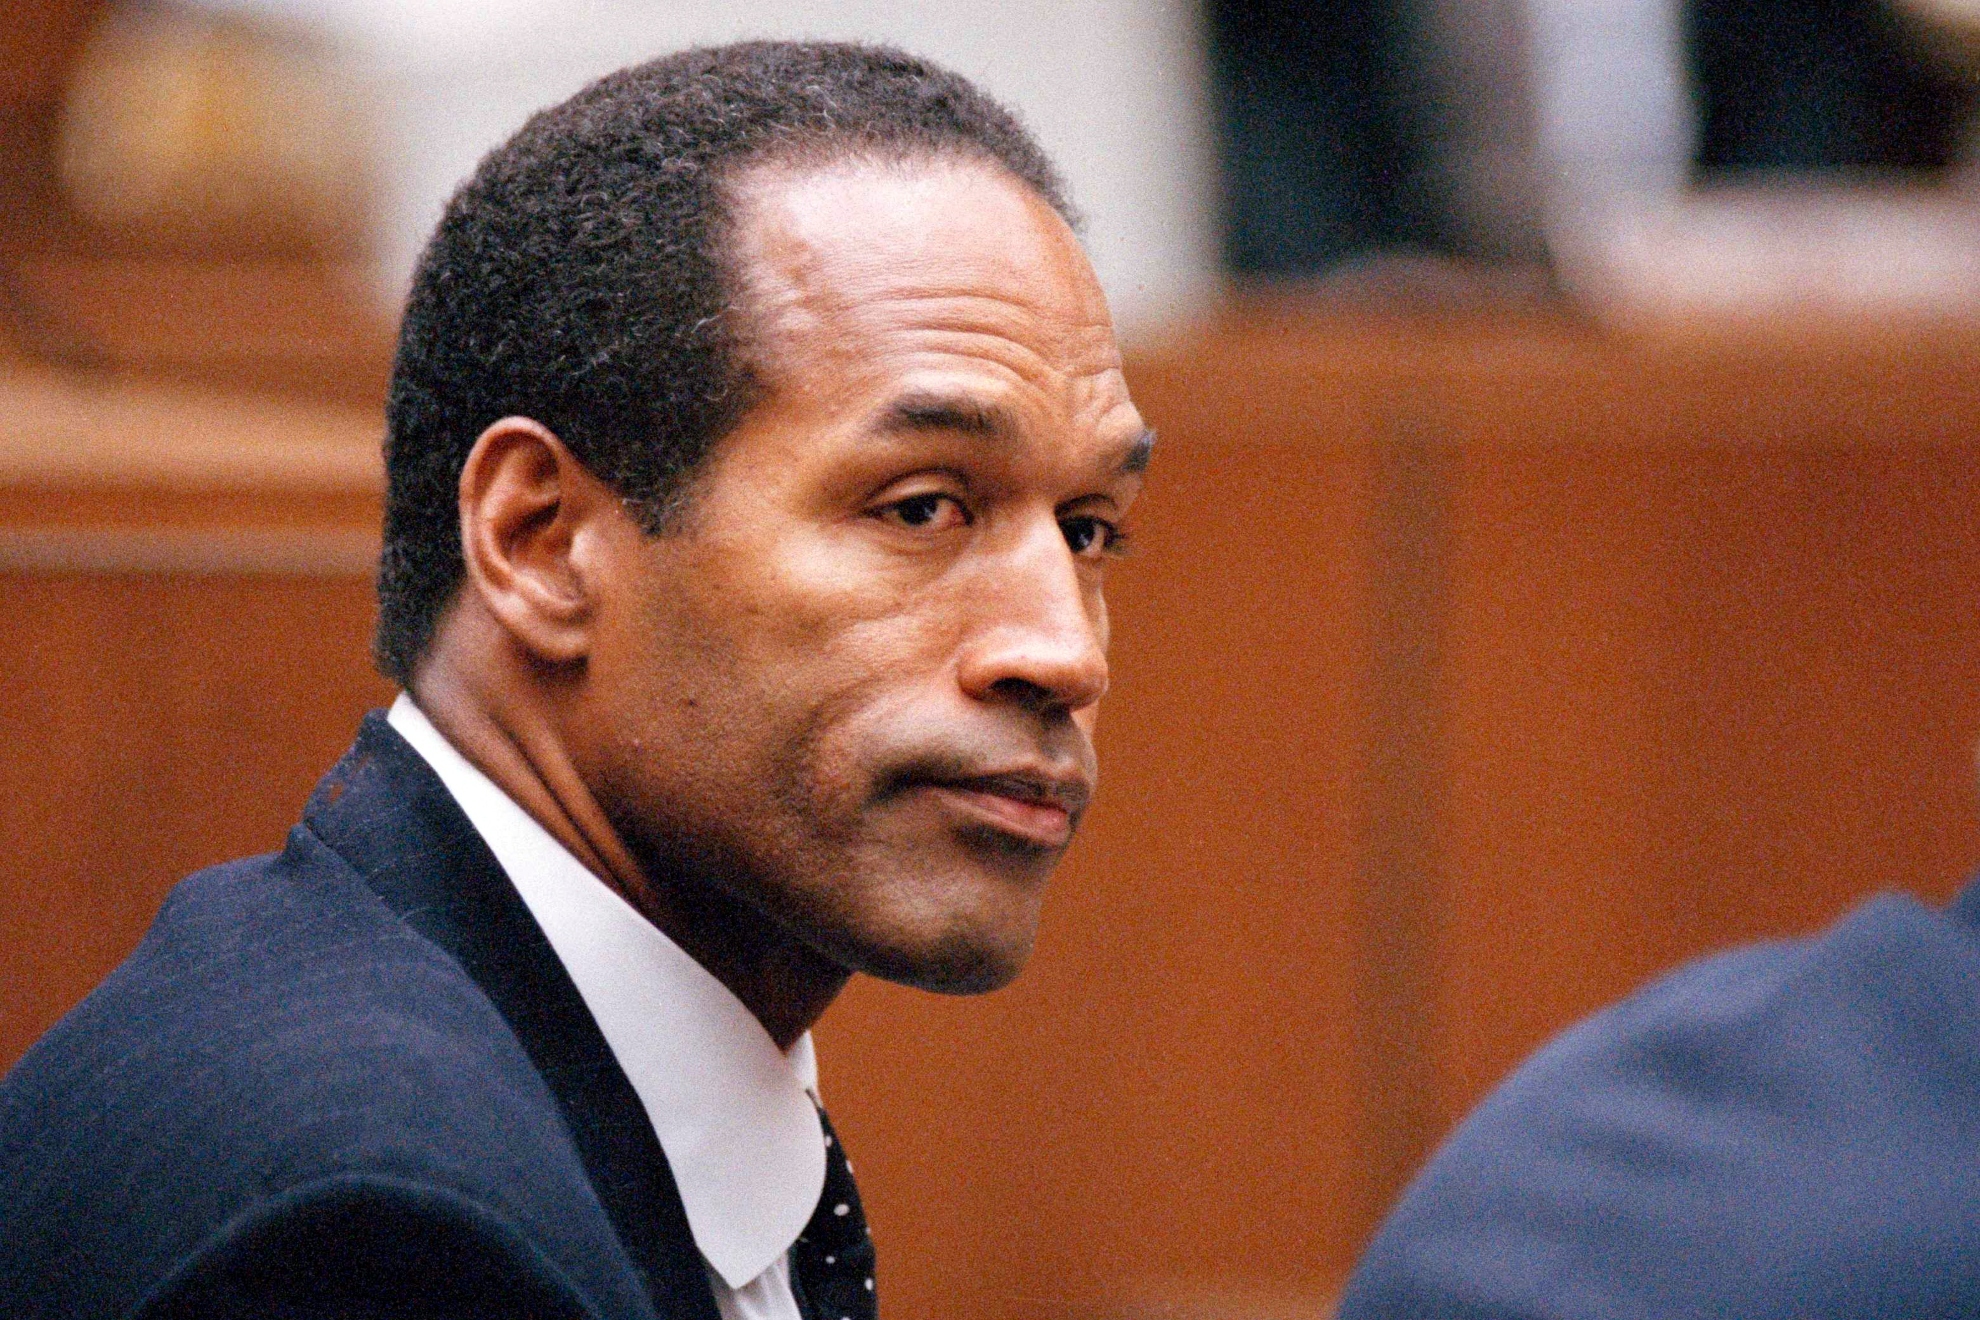 Memorabilia enthusiast aims to raise funds for a good cause through auction of O.J?s credit card